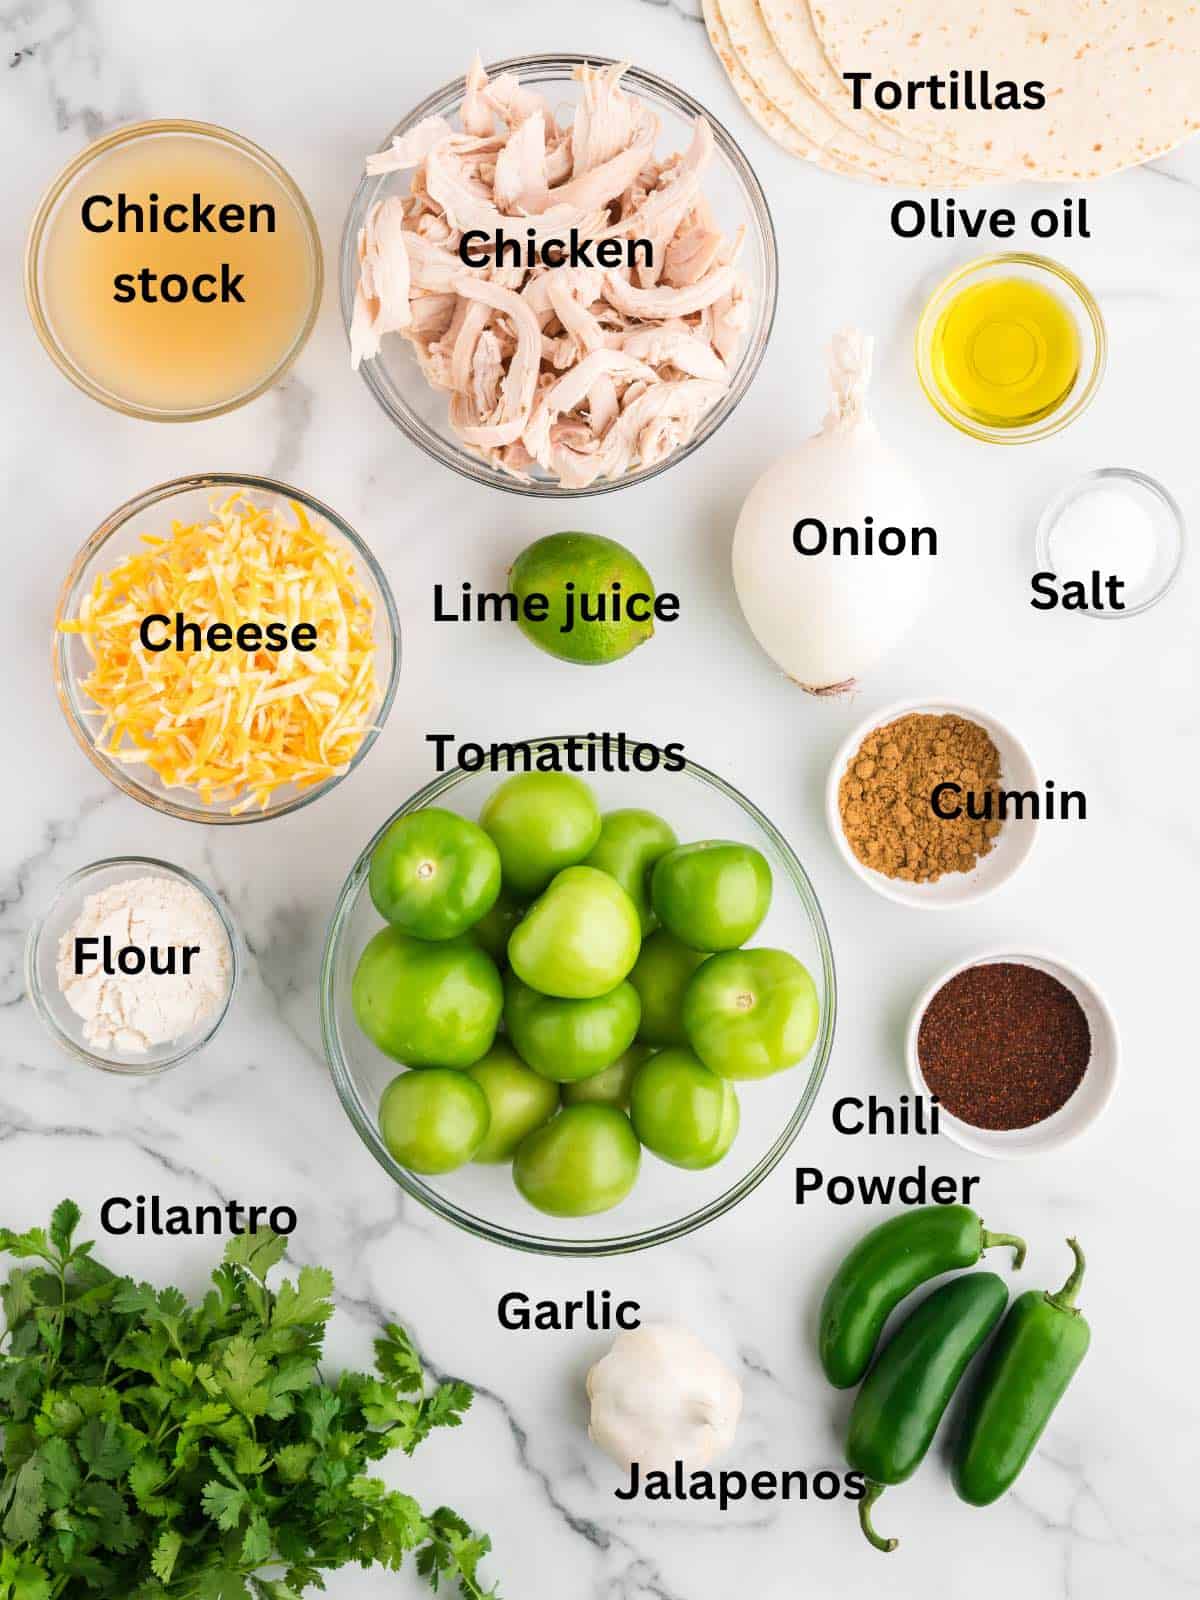 Ingredients for enchiladas include tomatillos, shredded chicken, cheese, and tortillas. 